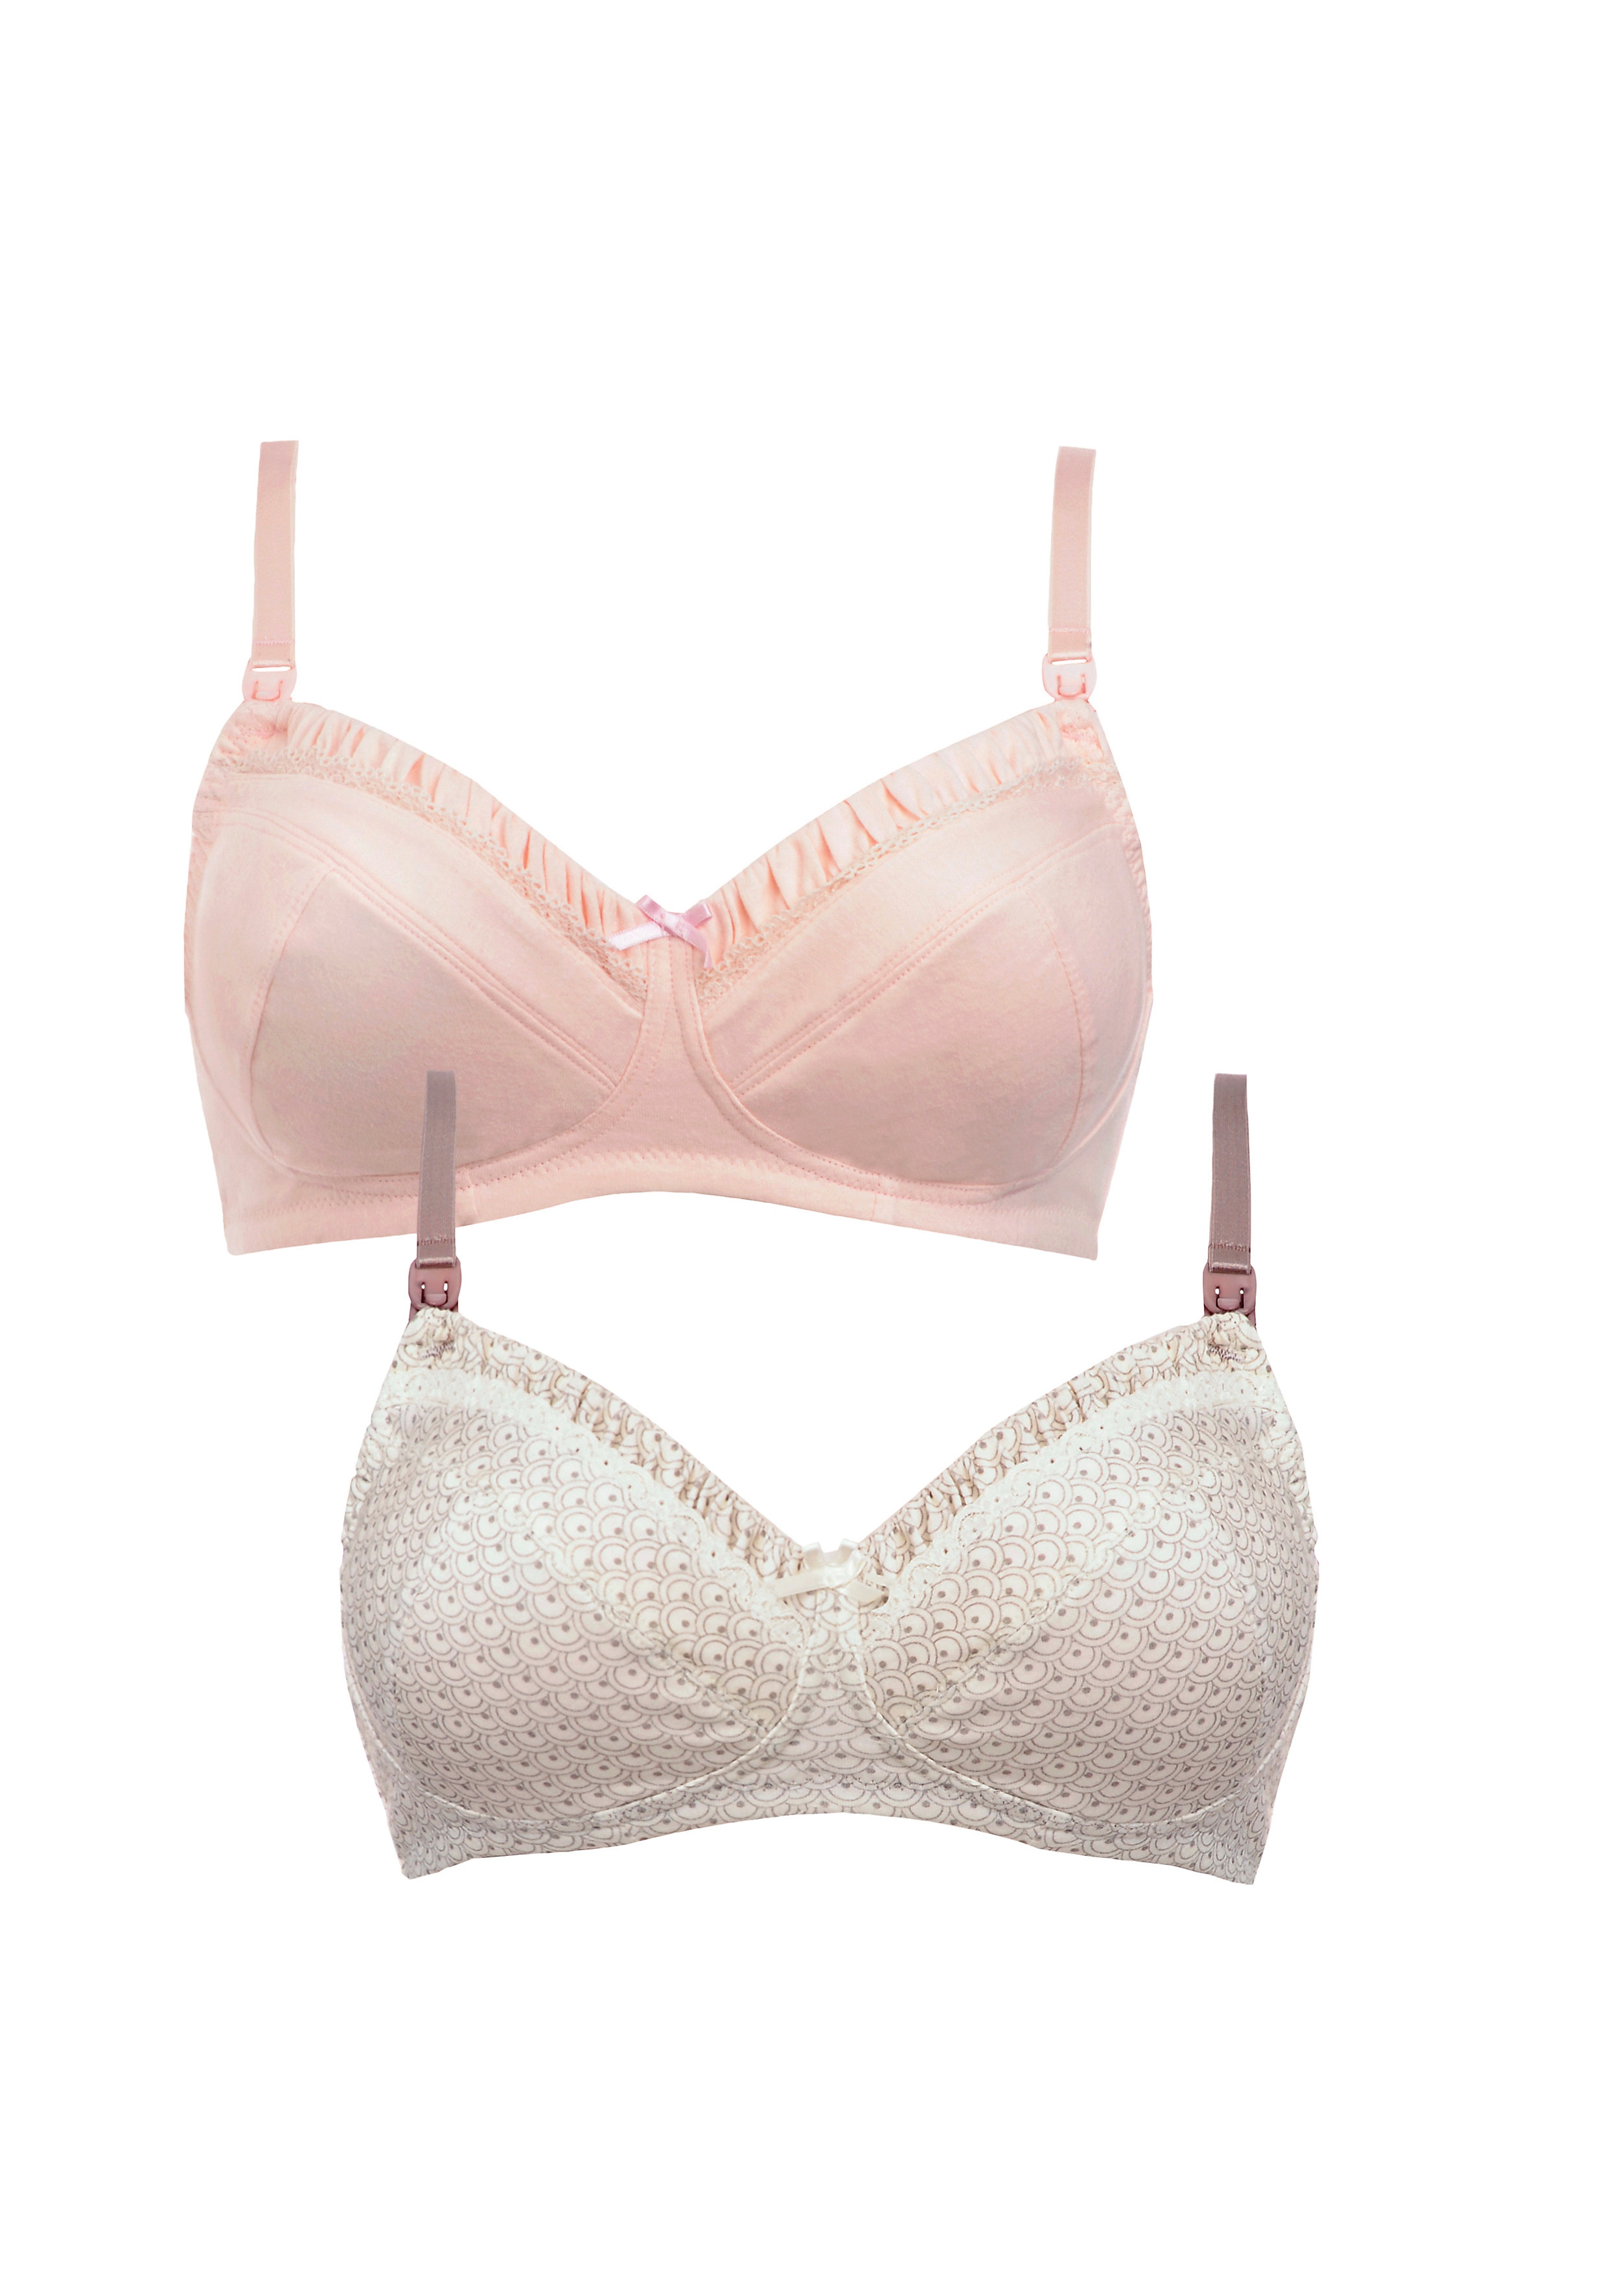 Mothercare | Women Maternity Nursing Bra Lace Detail - Pack Of 2 - Coral